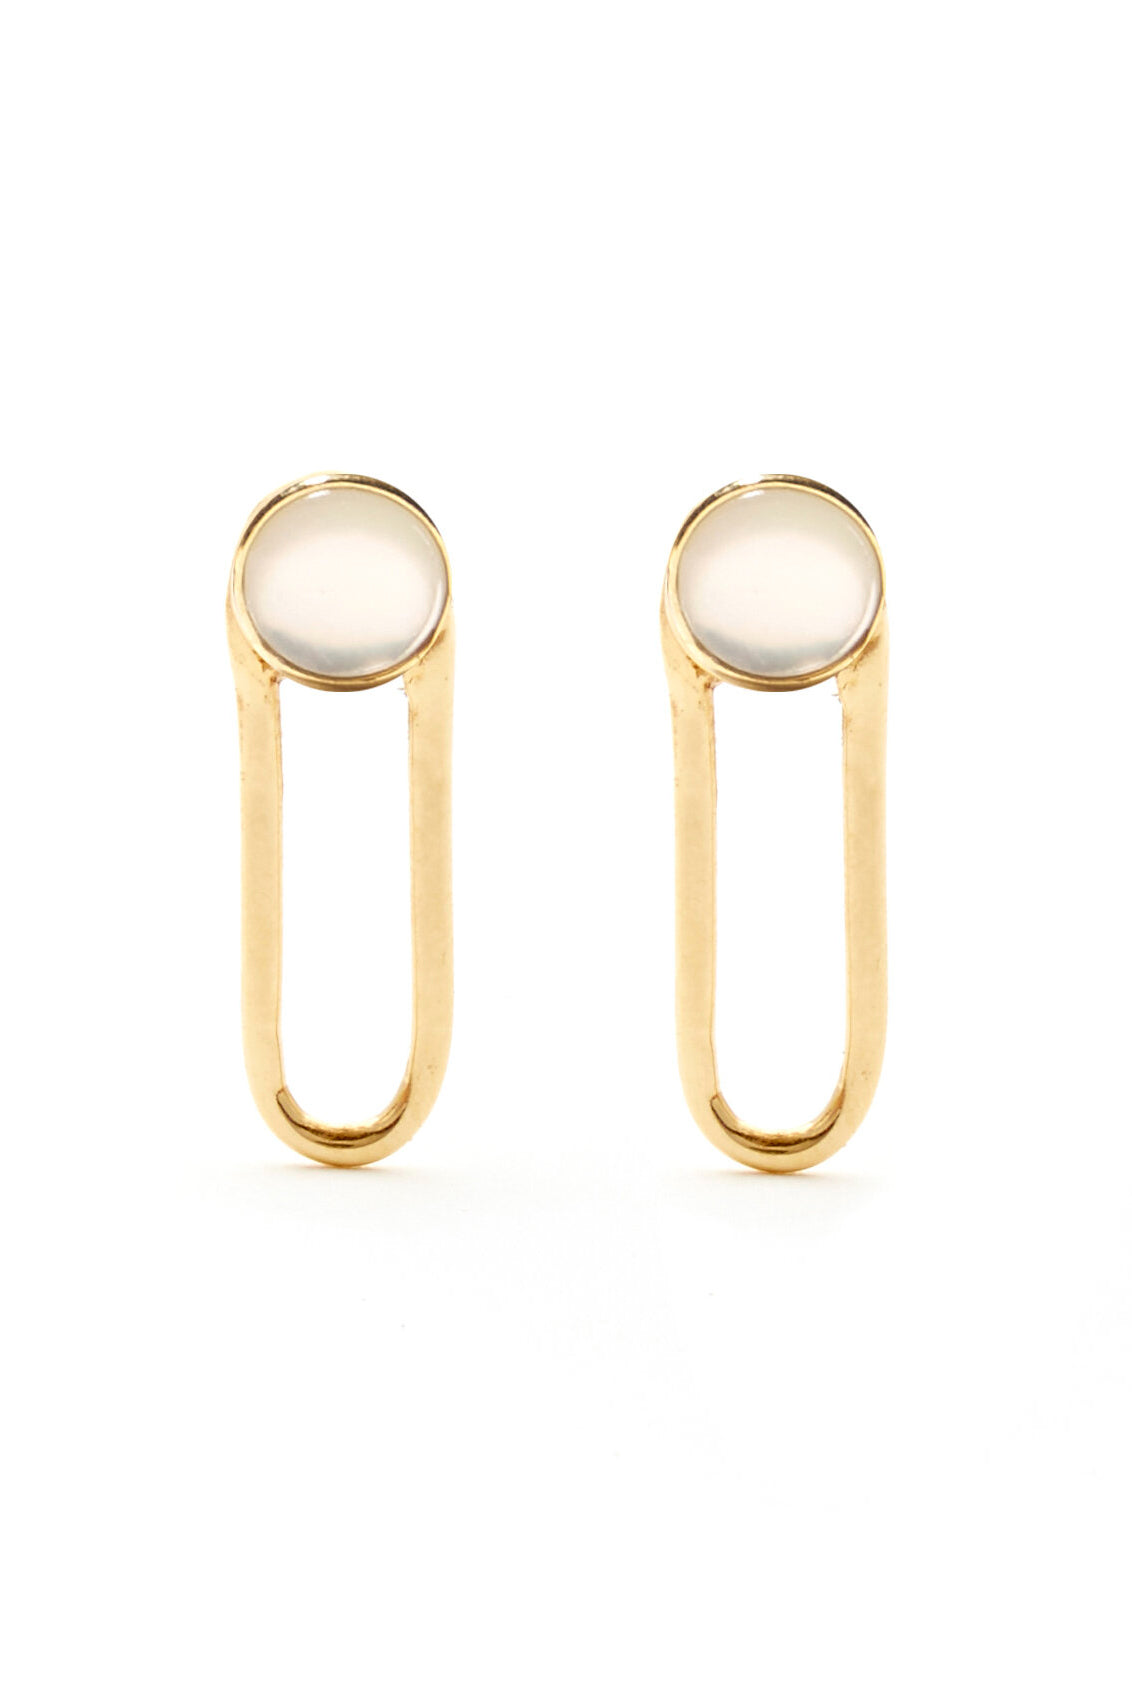 ODETTE_NY_Aura_Mother_of_Pearl_Stud_Earrings_with_Brass_Mini_Drop_Handmade_in_USA